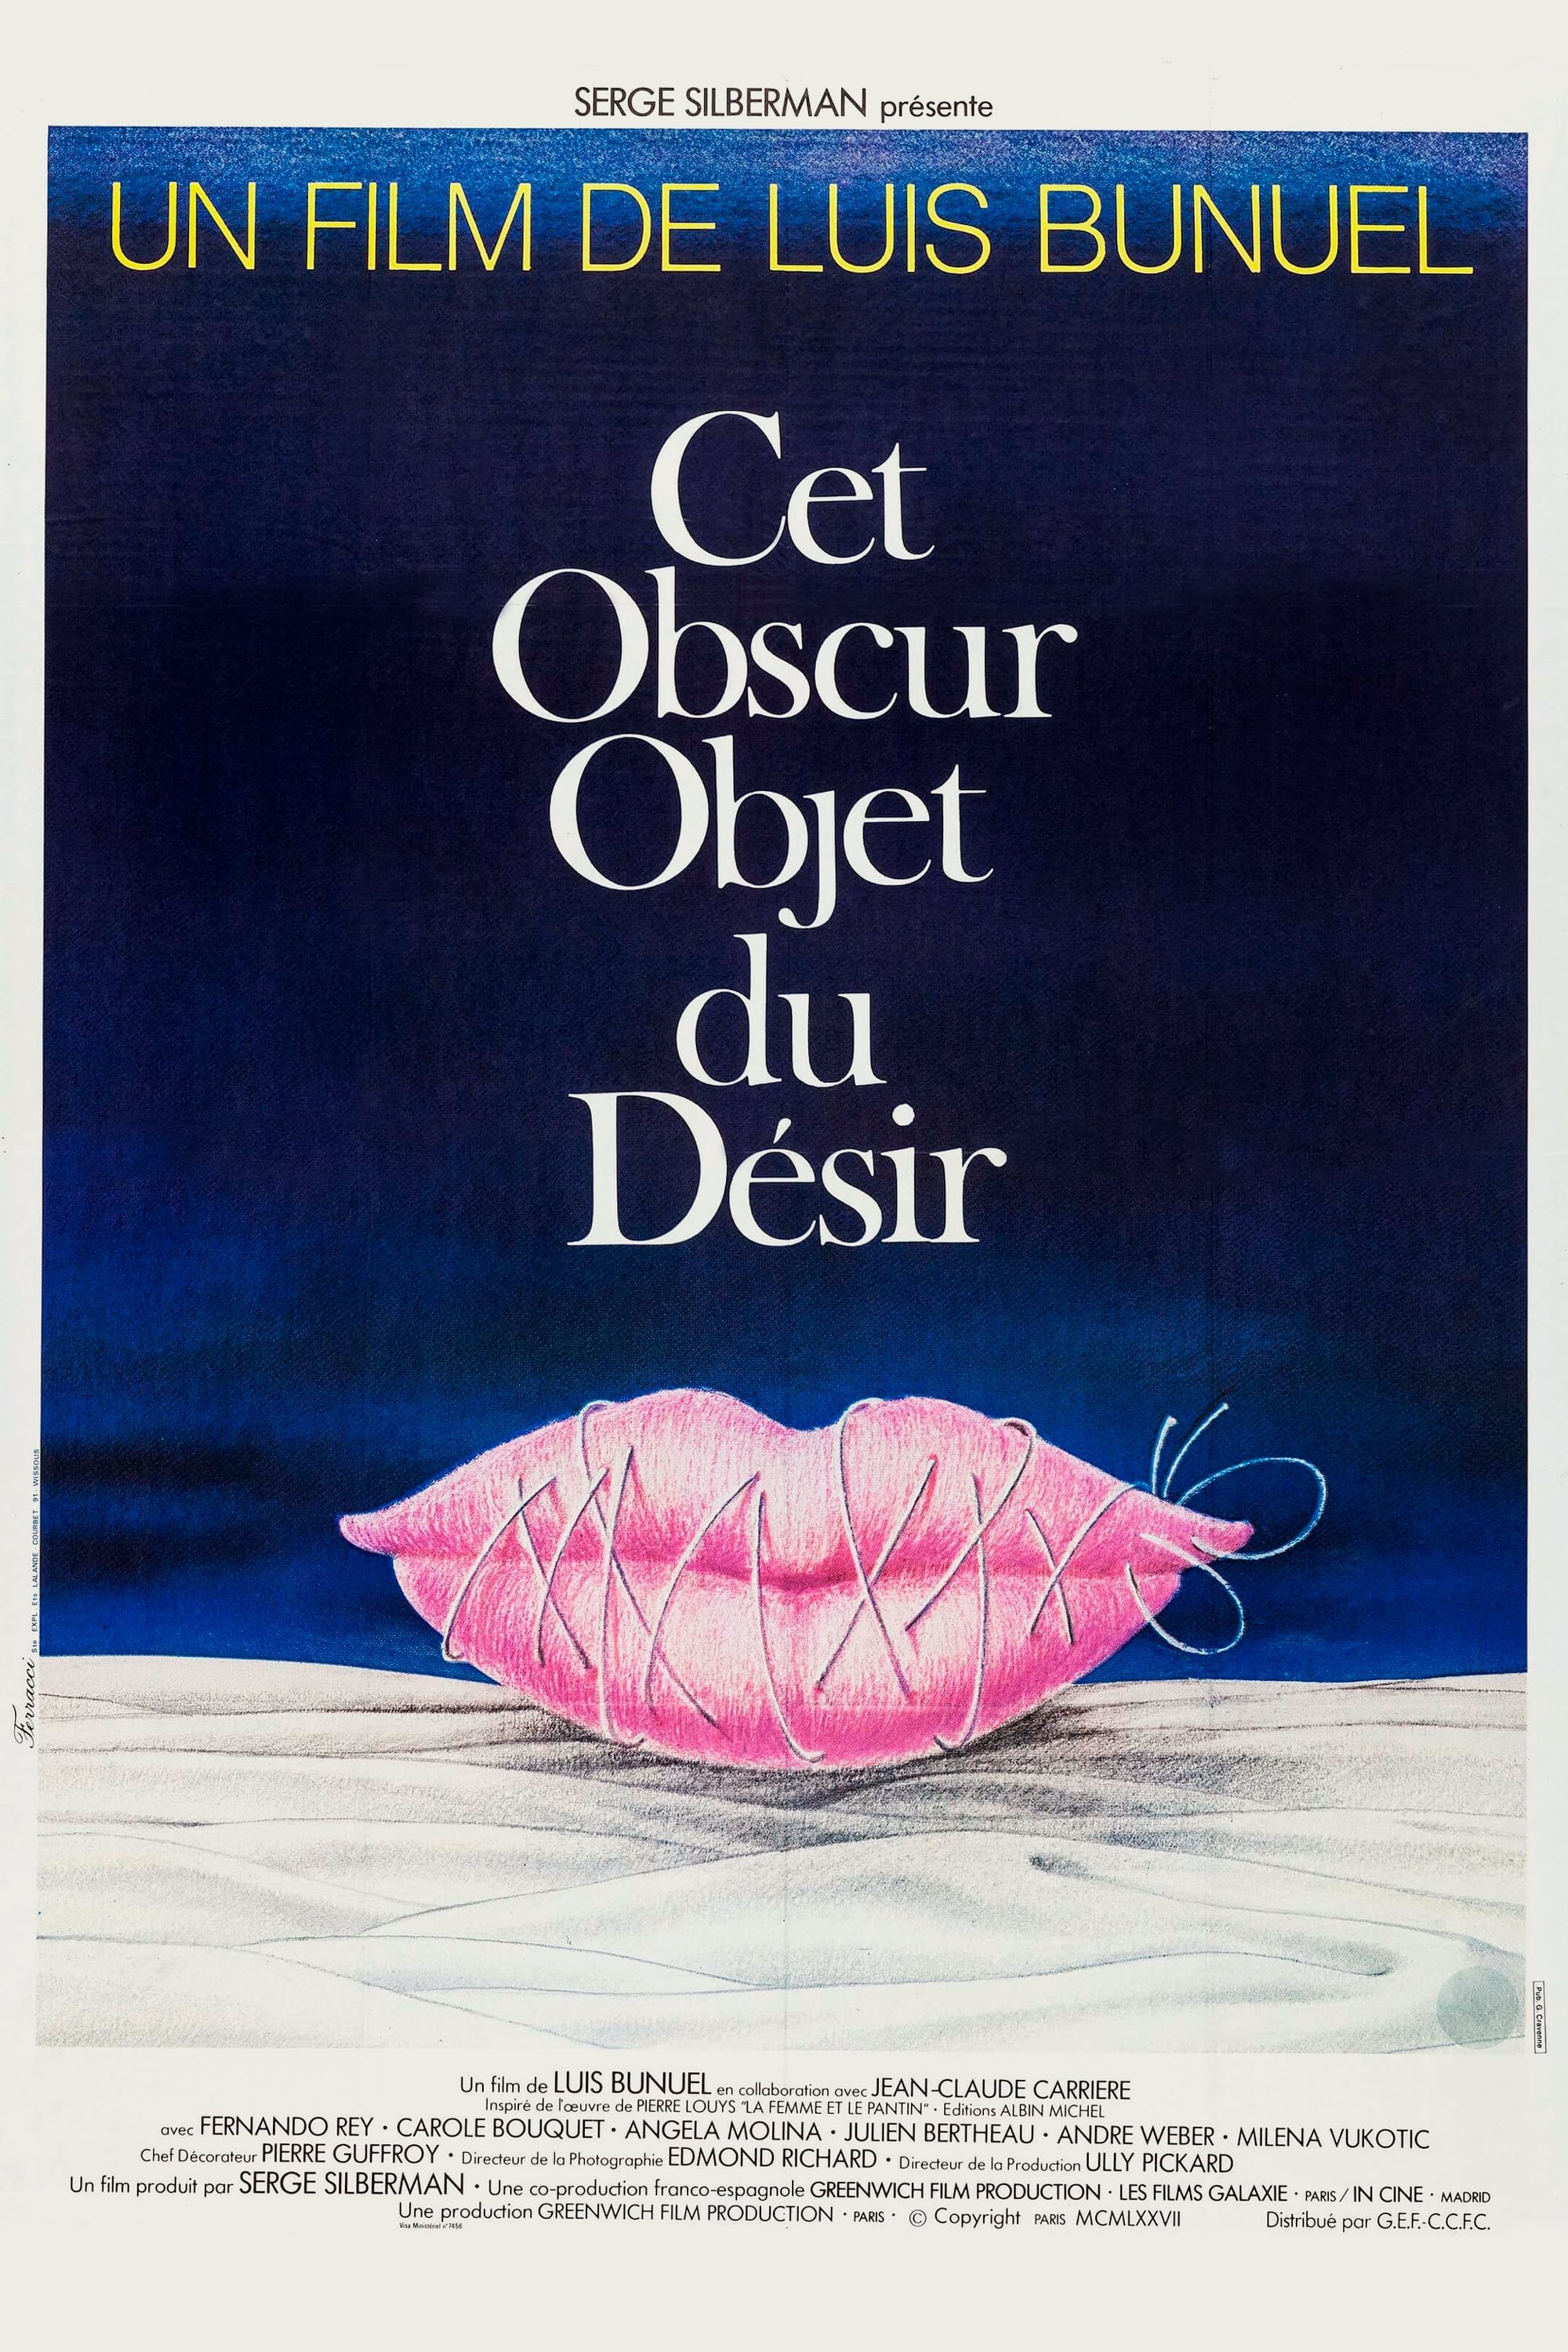 Dục Vọng Mơ Hồ - That Obscure Object of Desire (1977)